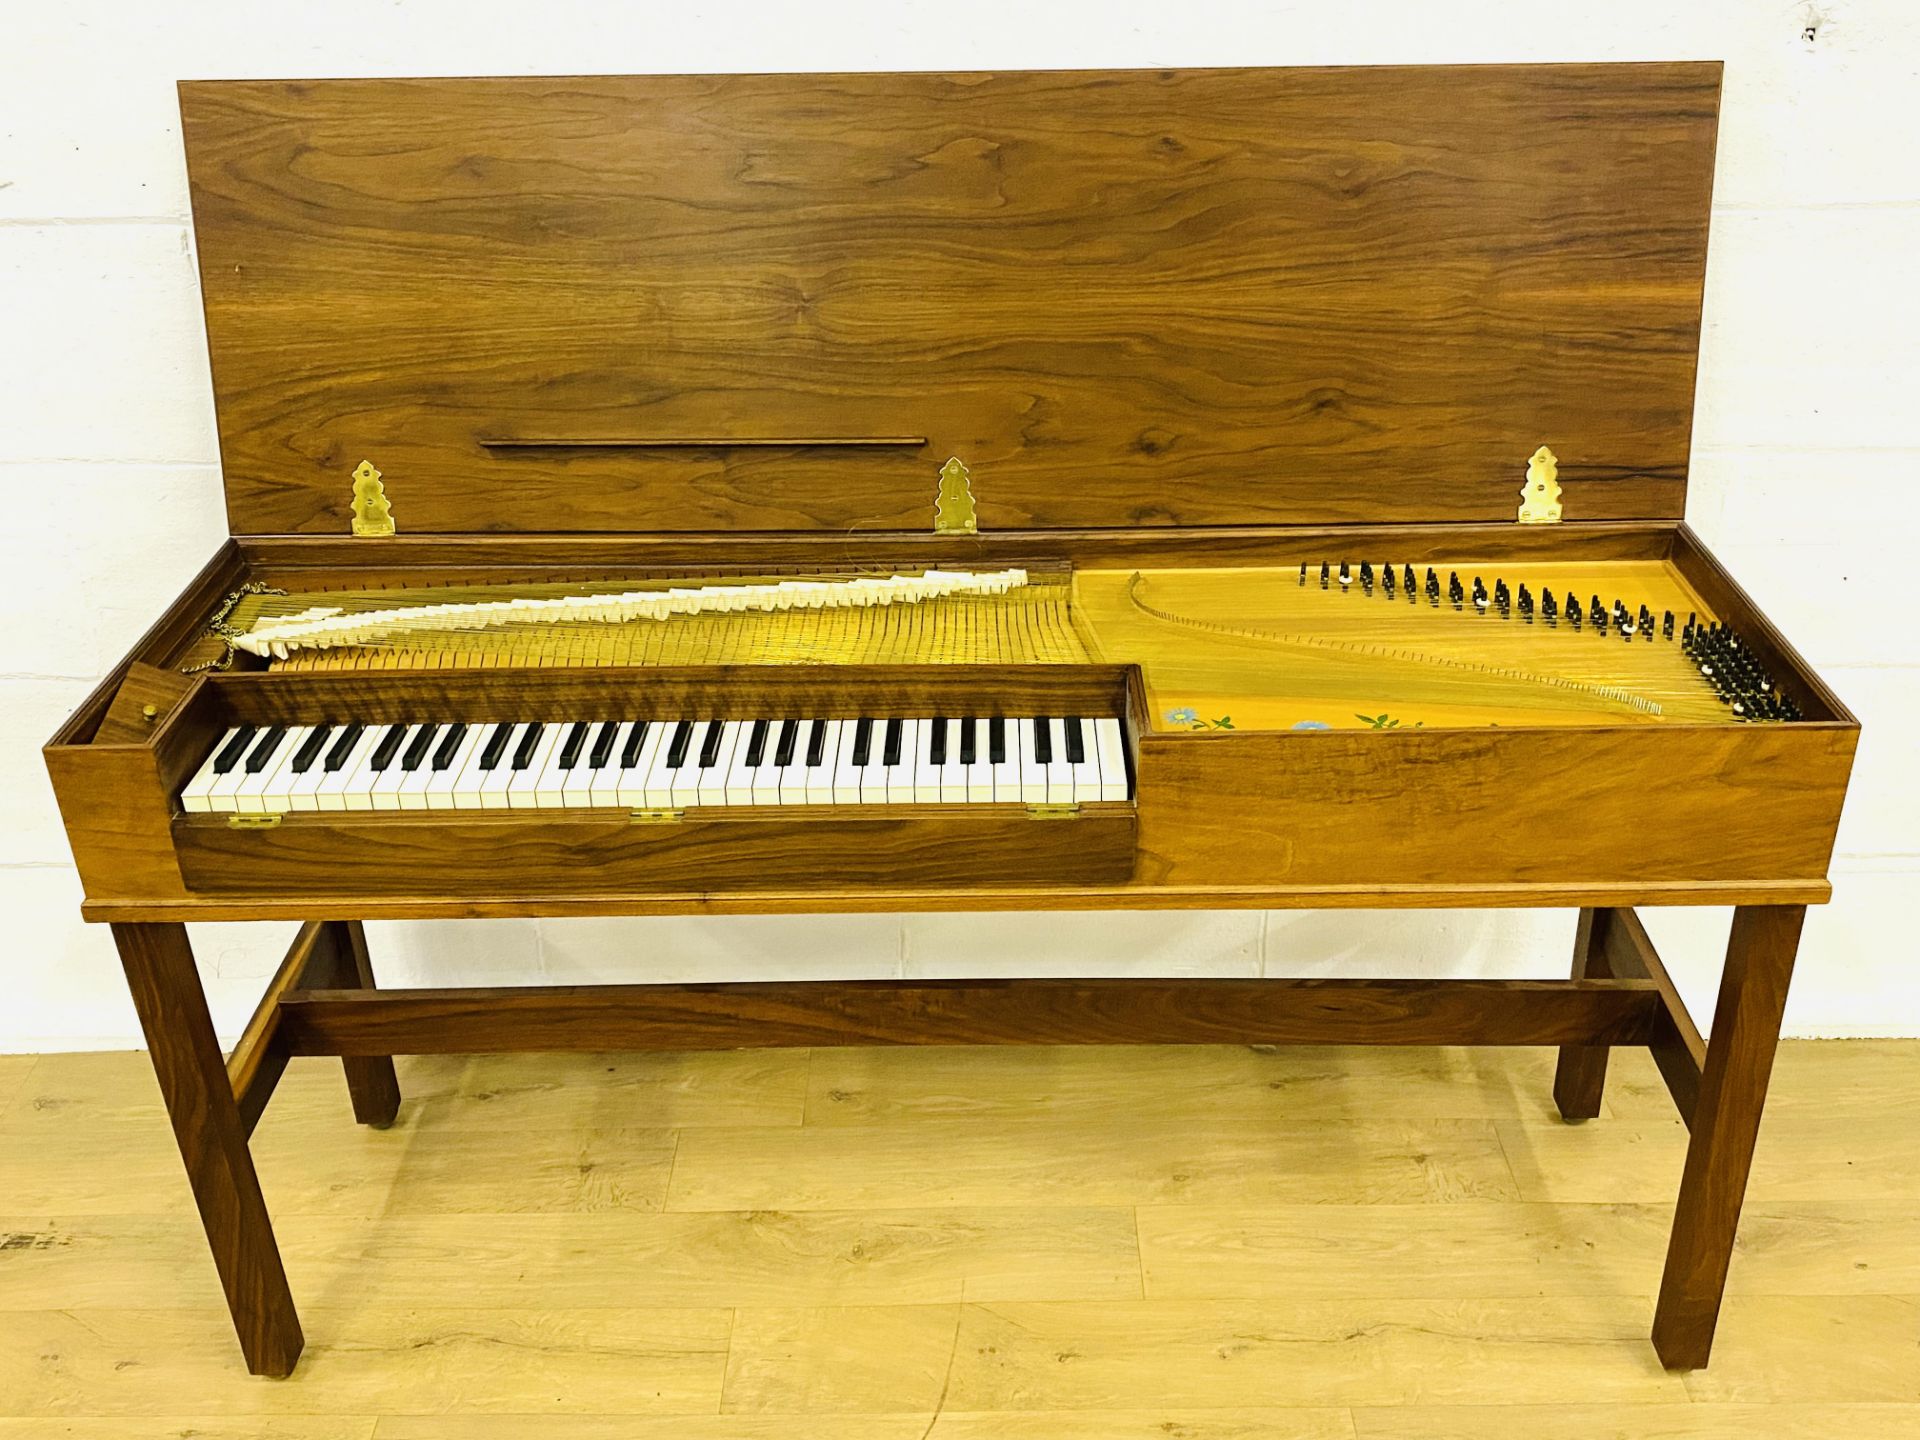 Clavichord - Image 6 of 8